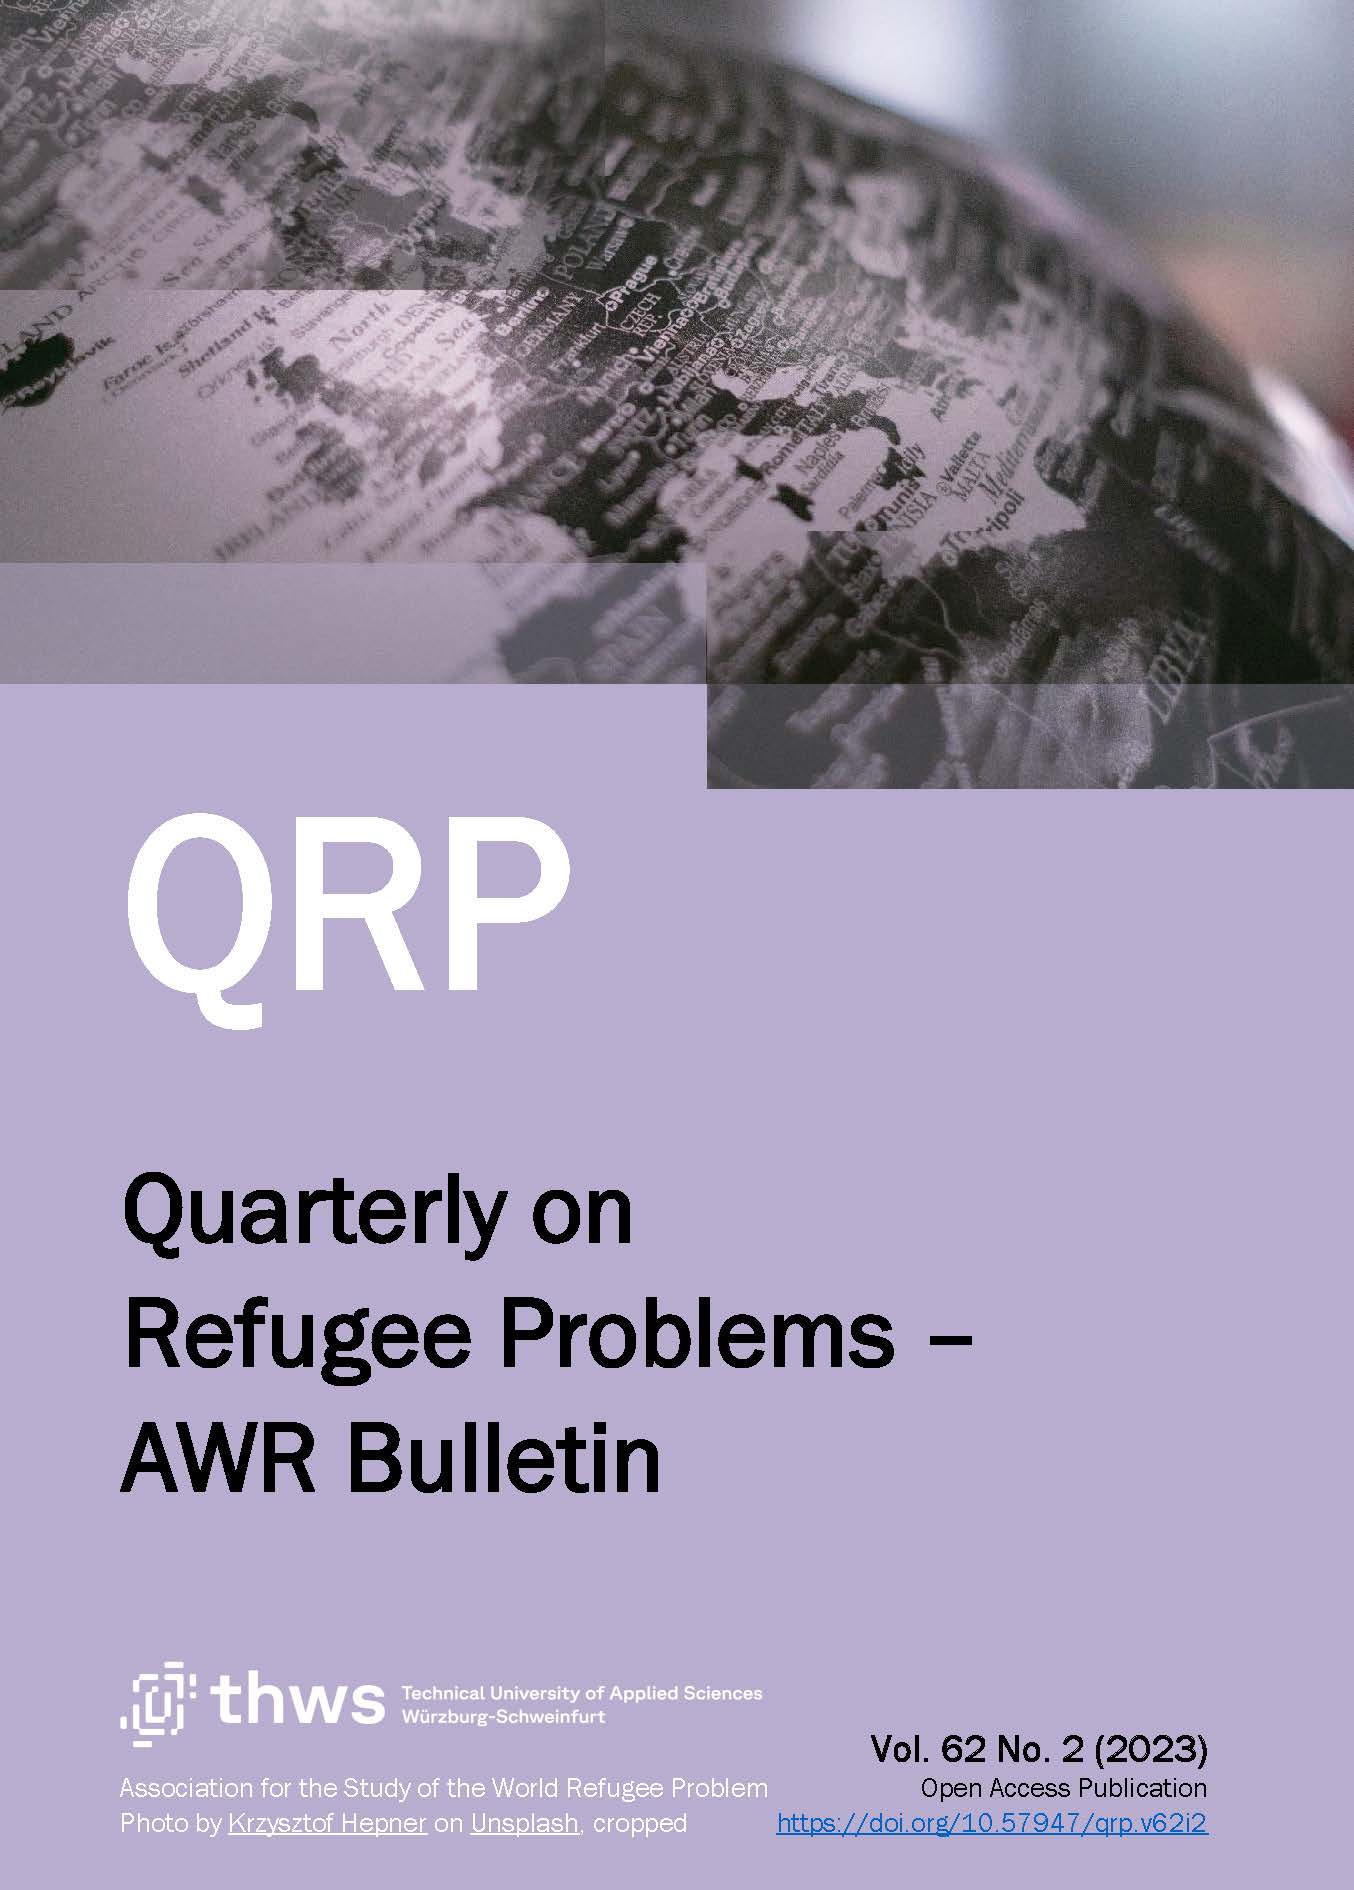 The cover of the 2023, volume 62, second issue of the Quarterly on Refugee Problems - AWR Bulletin